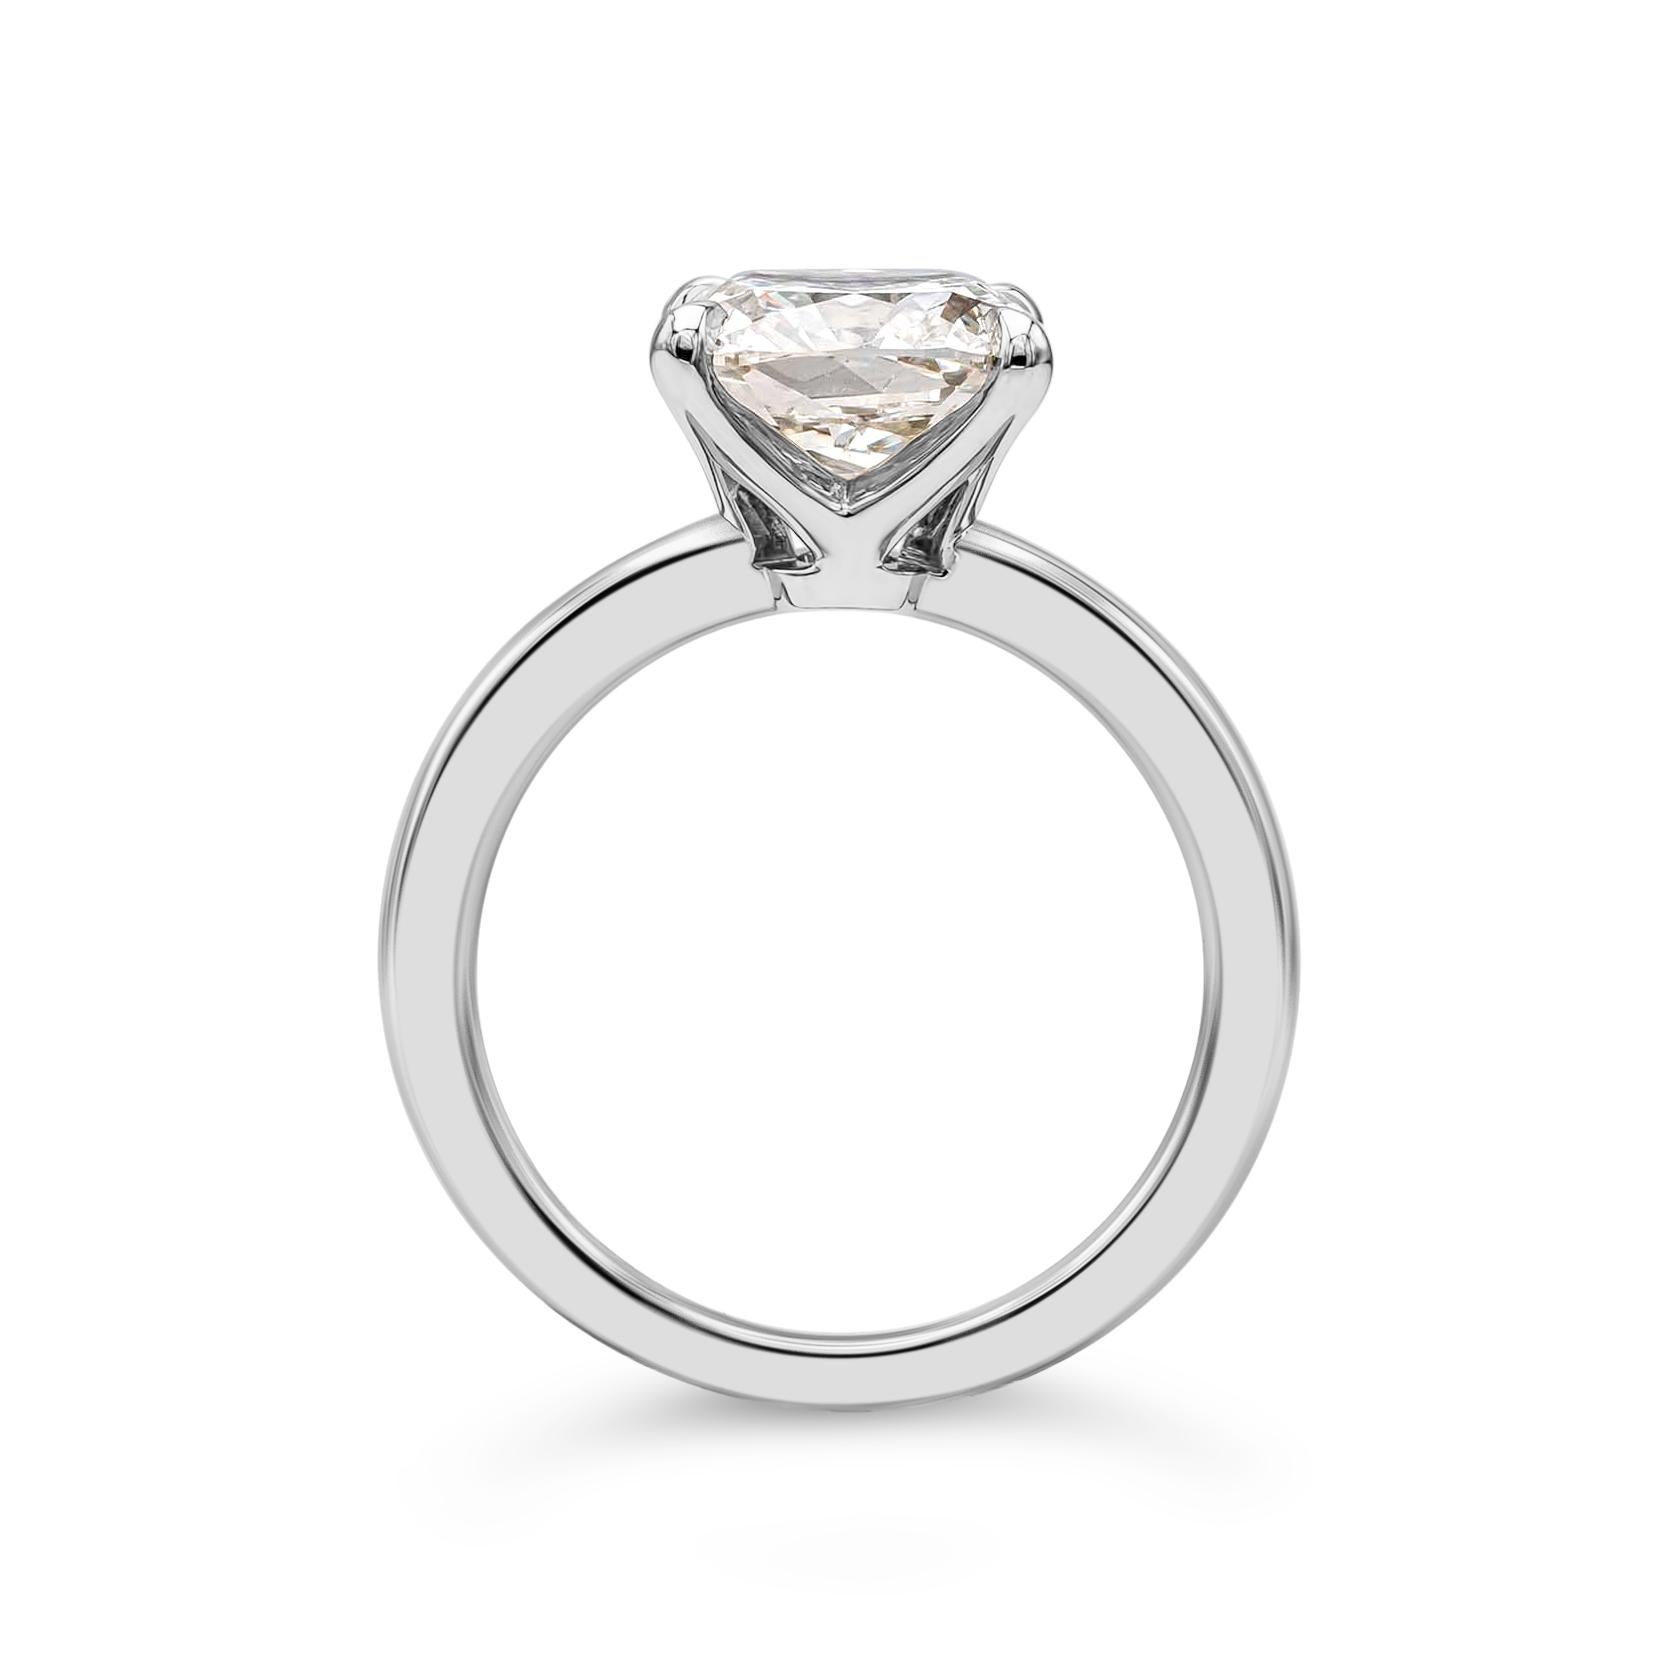 A timeless solitaire engagement ring style showcasing a 3.06 carats cushion cut diamond certified by GIA as K color and SI1 in clarity, set in a classic four prong setting. Finely made in polished platinum. Size 6 US resizable upon request.

Roman